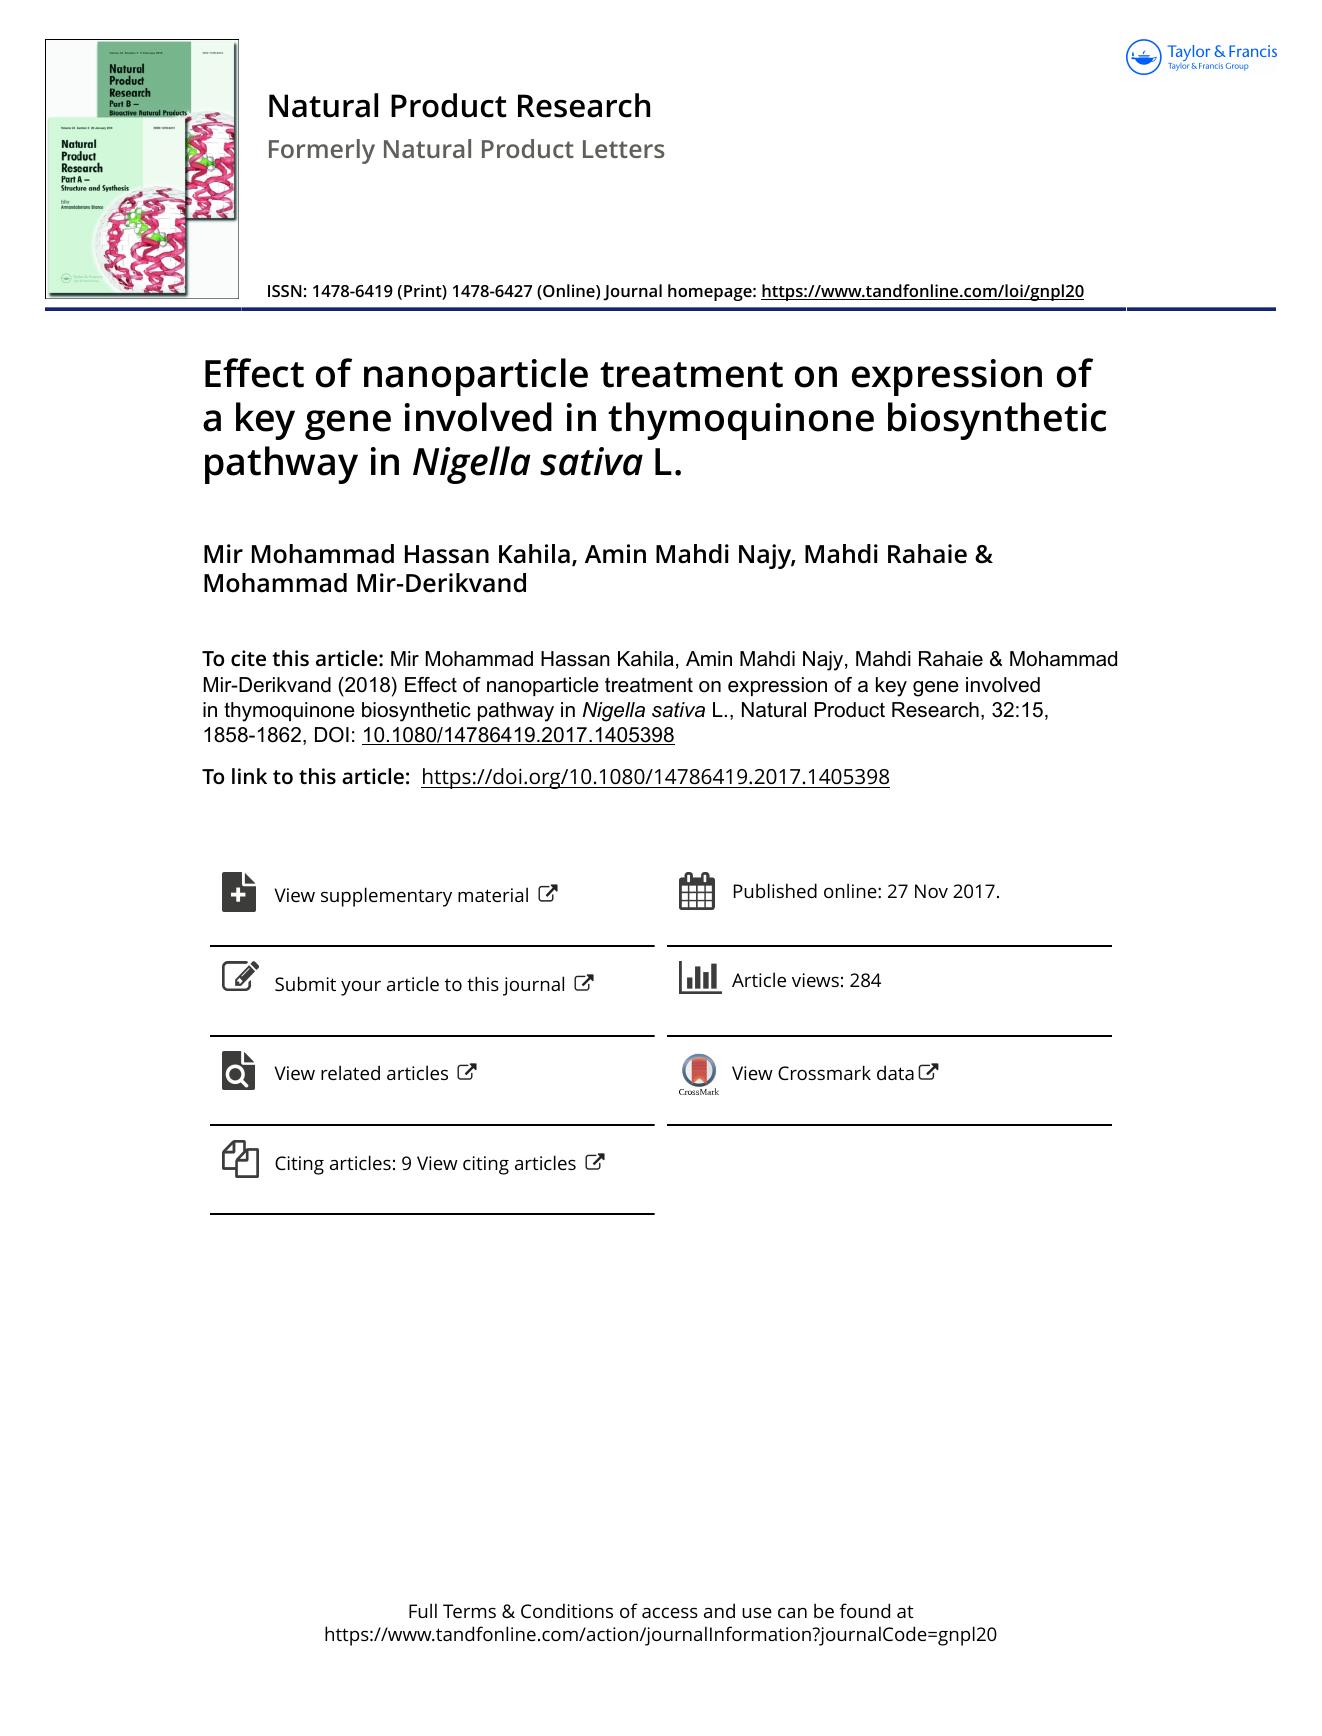 Effect of nanoparticle treatment on expression of a key gene involved in thymoquinone biosynthetic pathway in Nigella sativa L. by Mir Mohammad Hassan Kahila & Amin Mahdi Najy & Mahdi Rahaie & Mohammad Mir-Derikvand